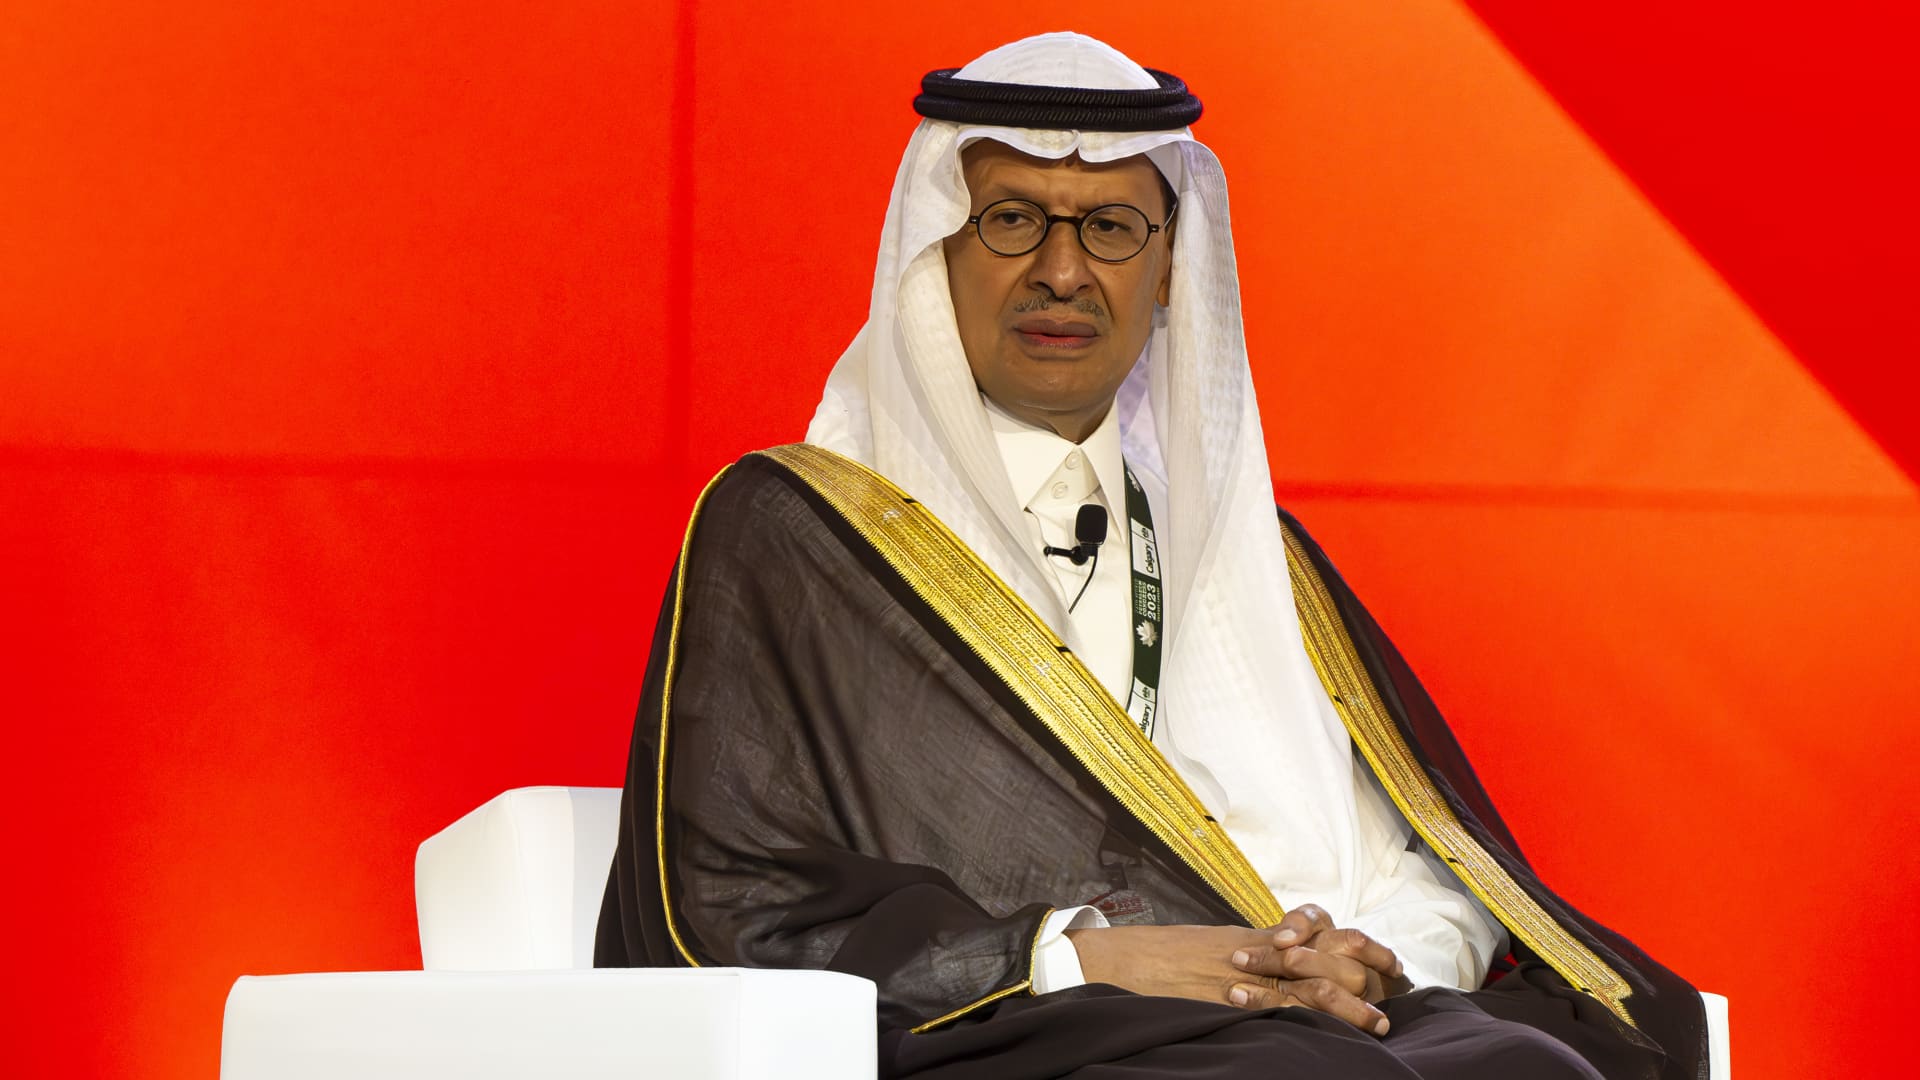 Saudi energy minister says oil supply cuts are not about ‘jacking up costs,’ as Brent hovers at $95 a barrel